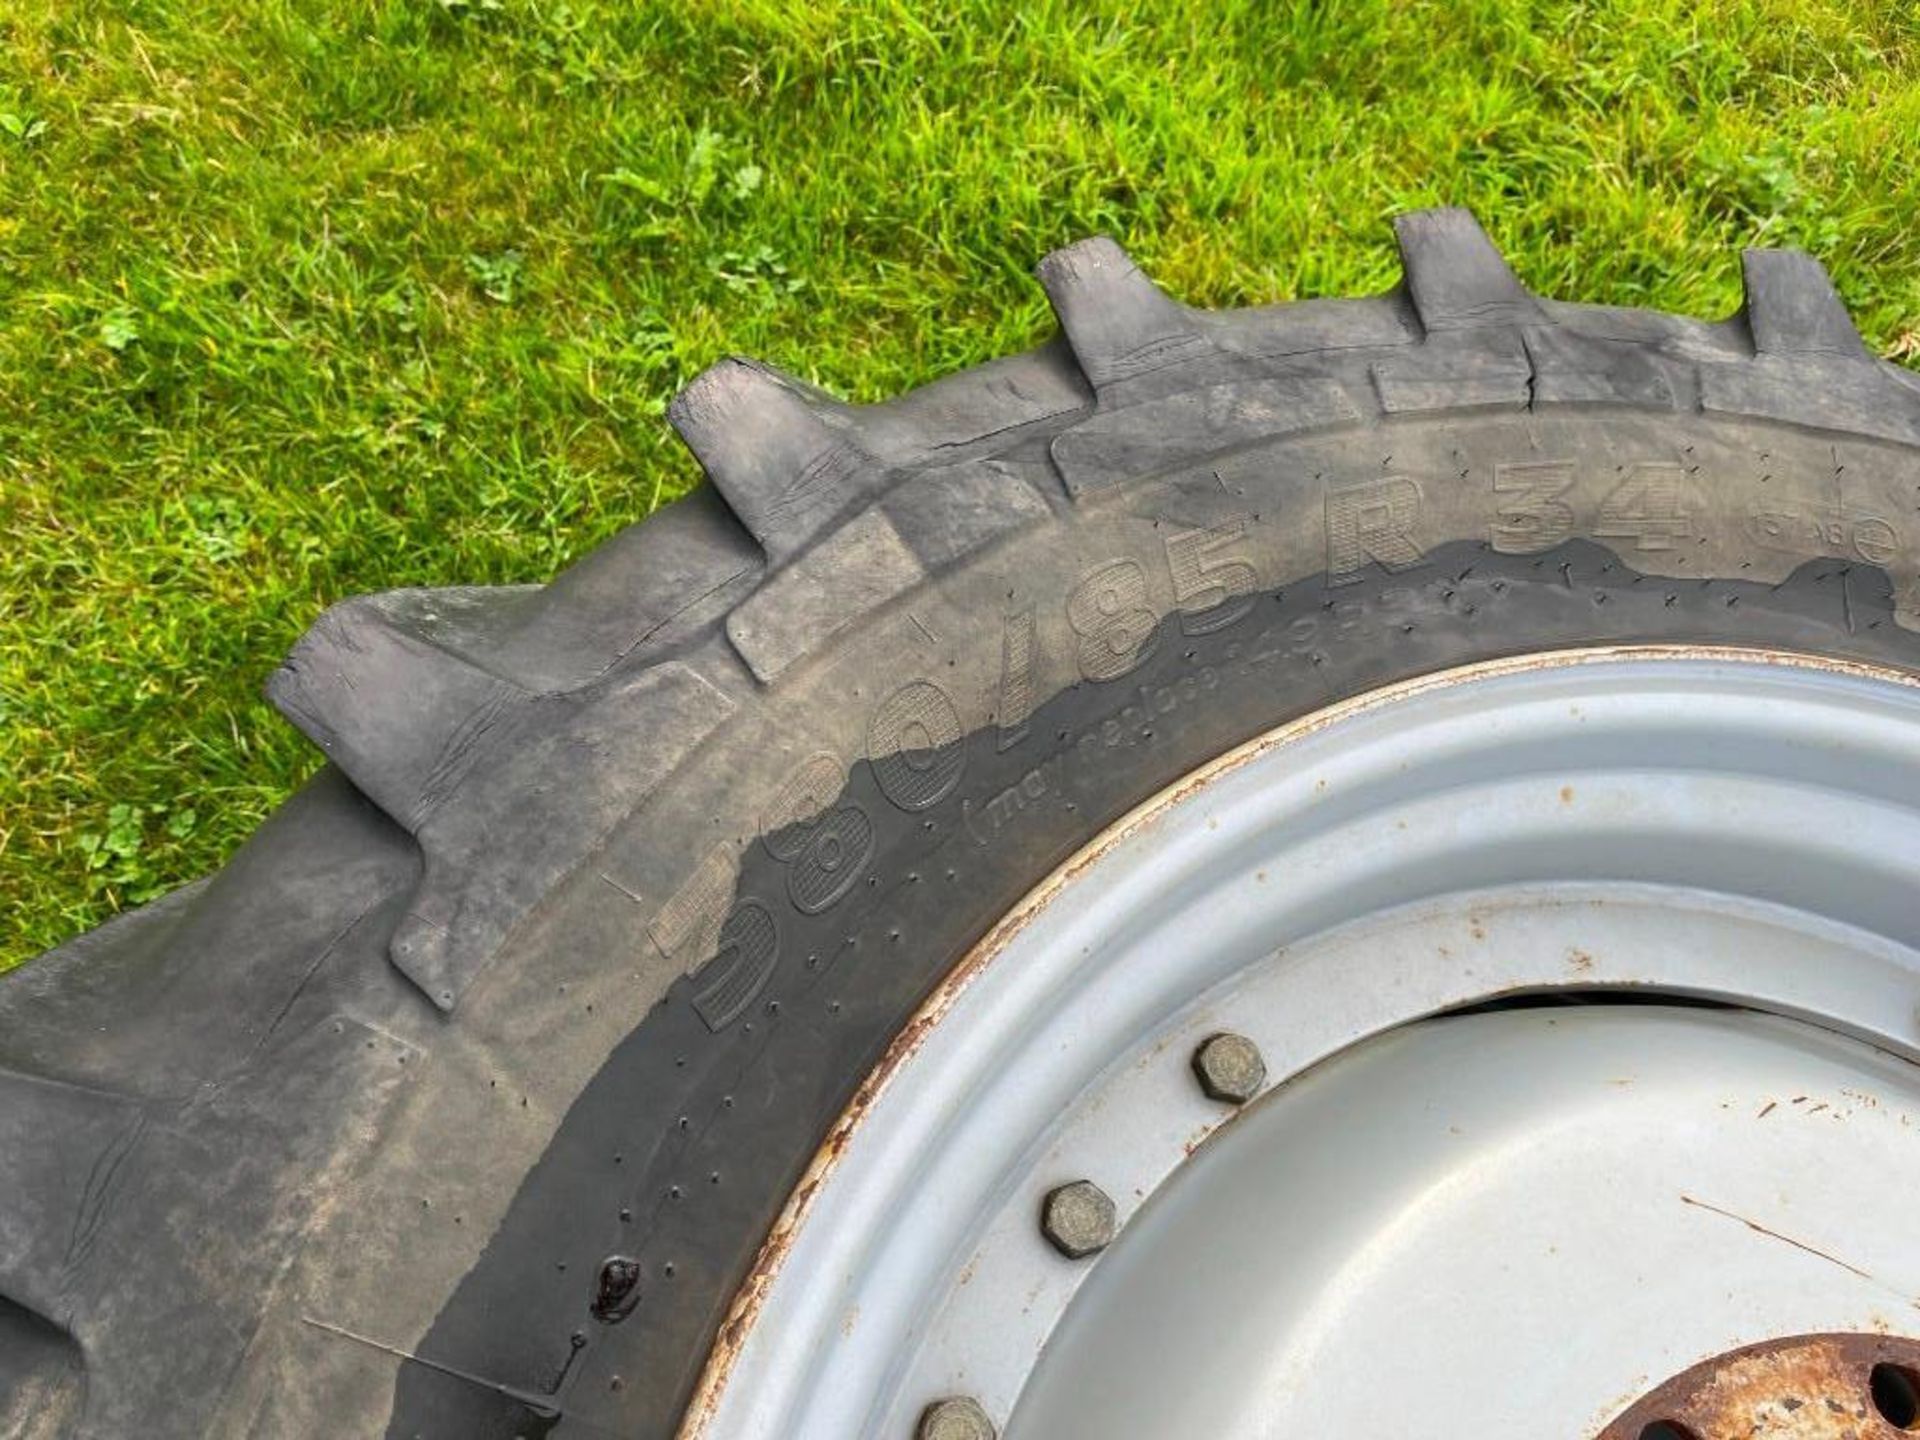 Set of Massey Ferguson Row Crop Wheels and Tyres, Tyres: Rear: 380/90 R50, Front: 380/85 R34 - Image 3 of 7